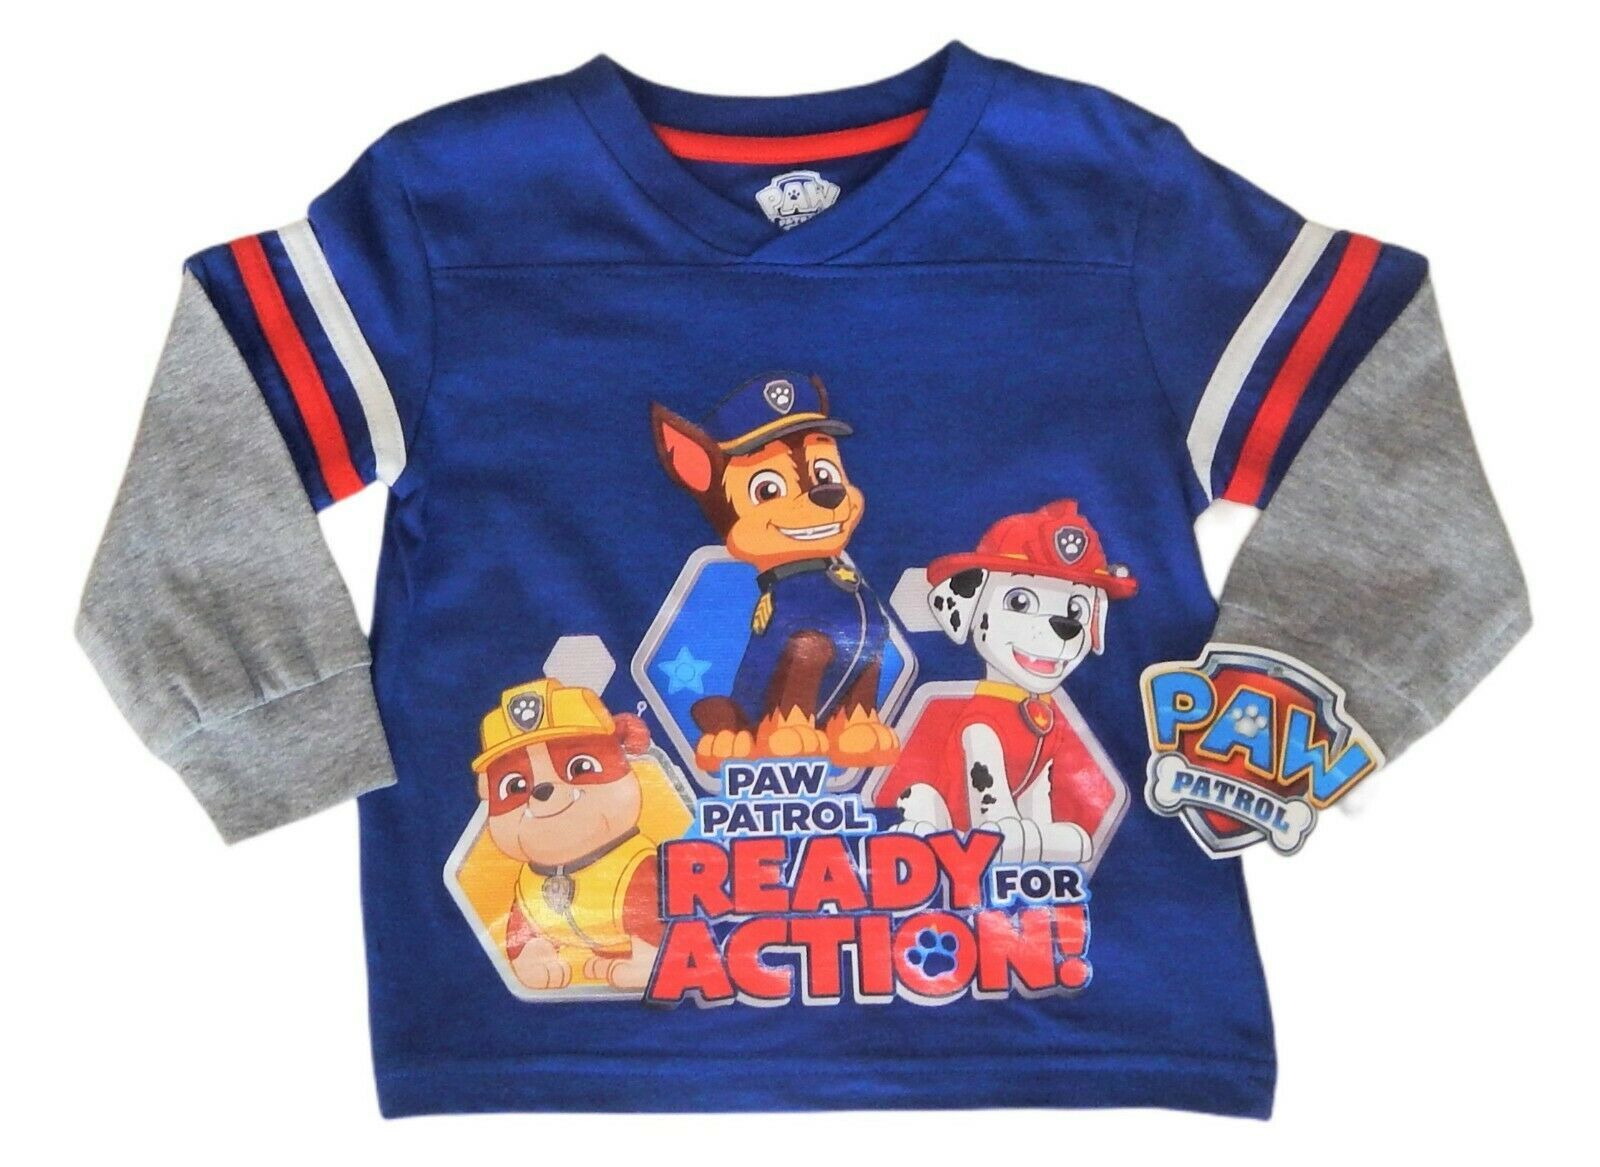 PAW PATROL CHASE MARSHALL Long-Sleeve Shirt Mock-Layer Tee NWT Size 2T or 3T - $10.32